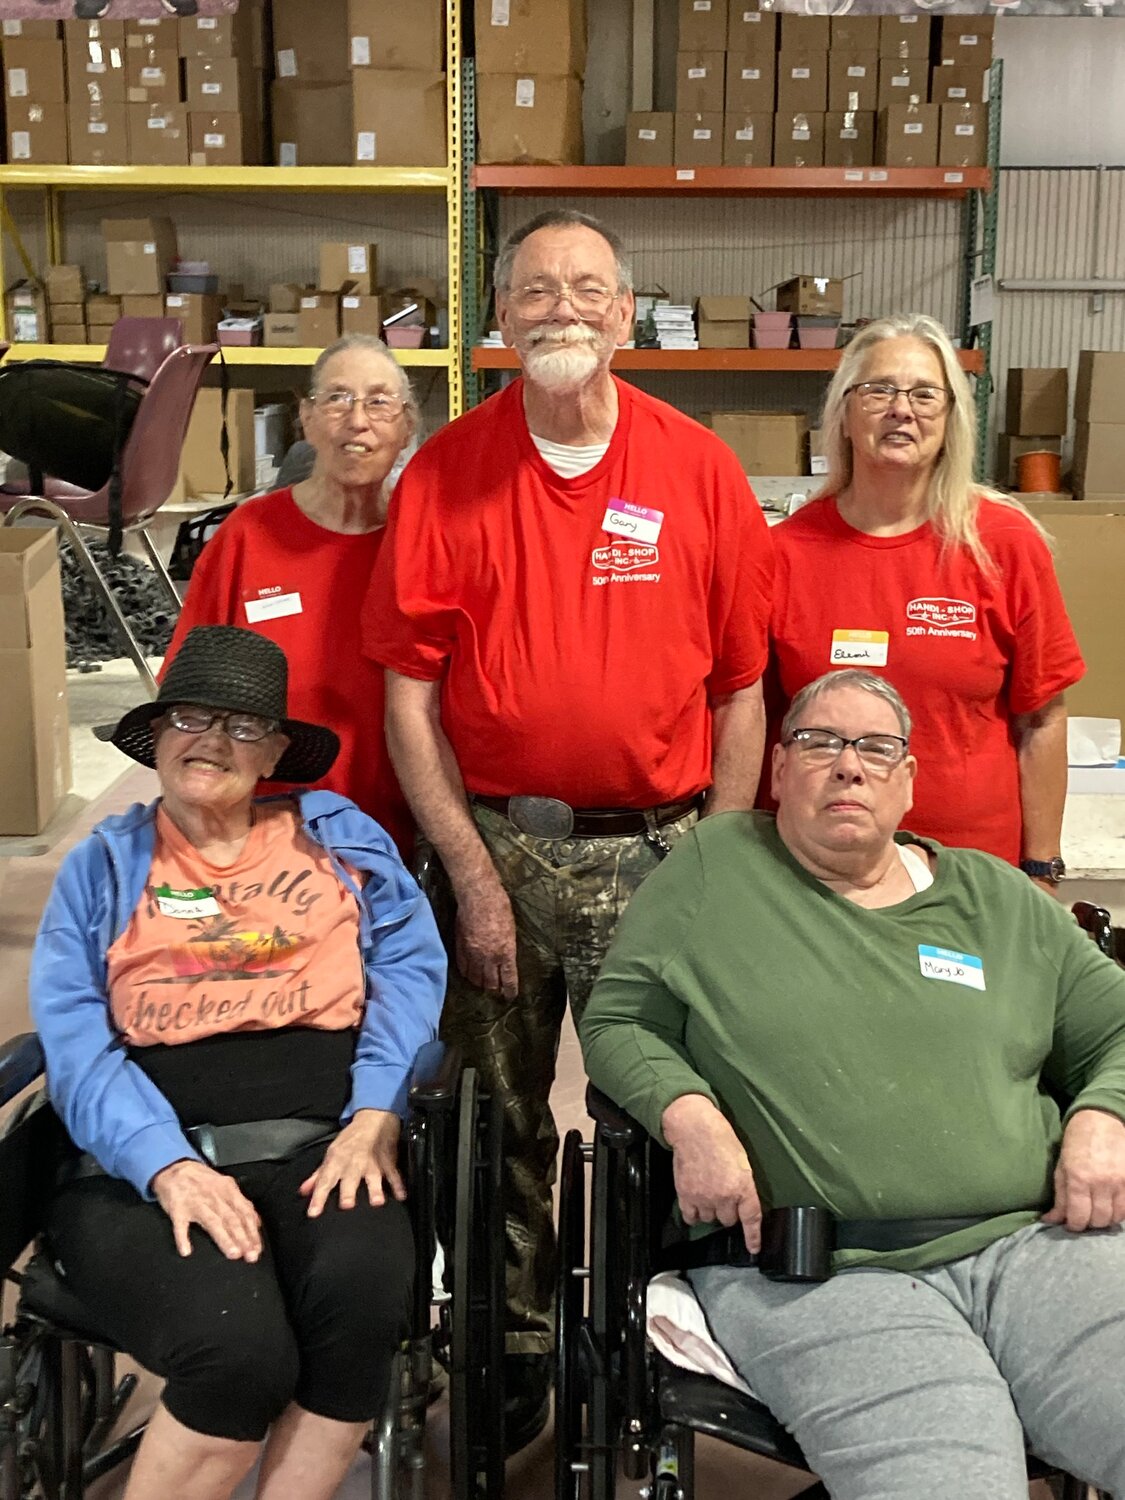 The original “Fab Five” employees at the Handi Shop got together for a photo at the 50th anniversary celebration. From left standing: May Trams, Gary Brewer, and Elly Chrismer. Sitting is Donna Davis, left, and Mary Jo Lierheimer, right. Trams, Brewer, and Chrismer all still work at the shop.